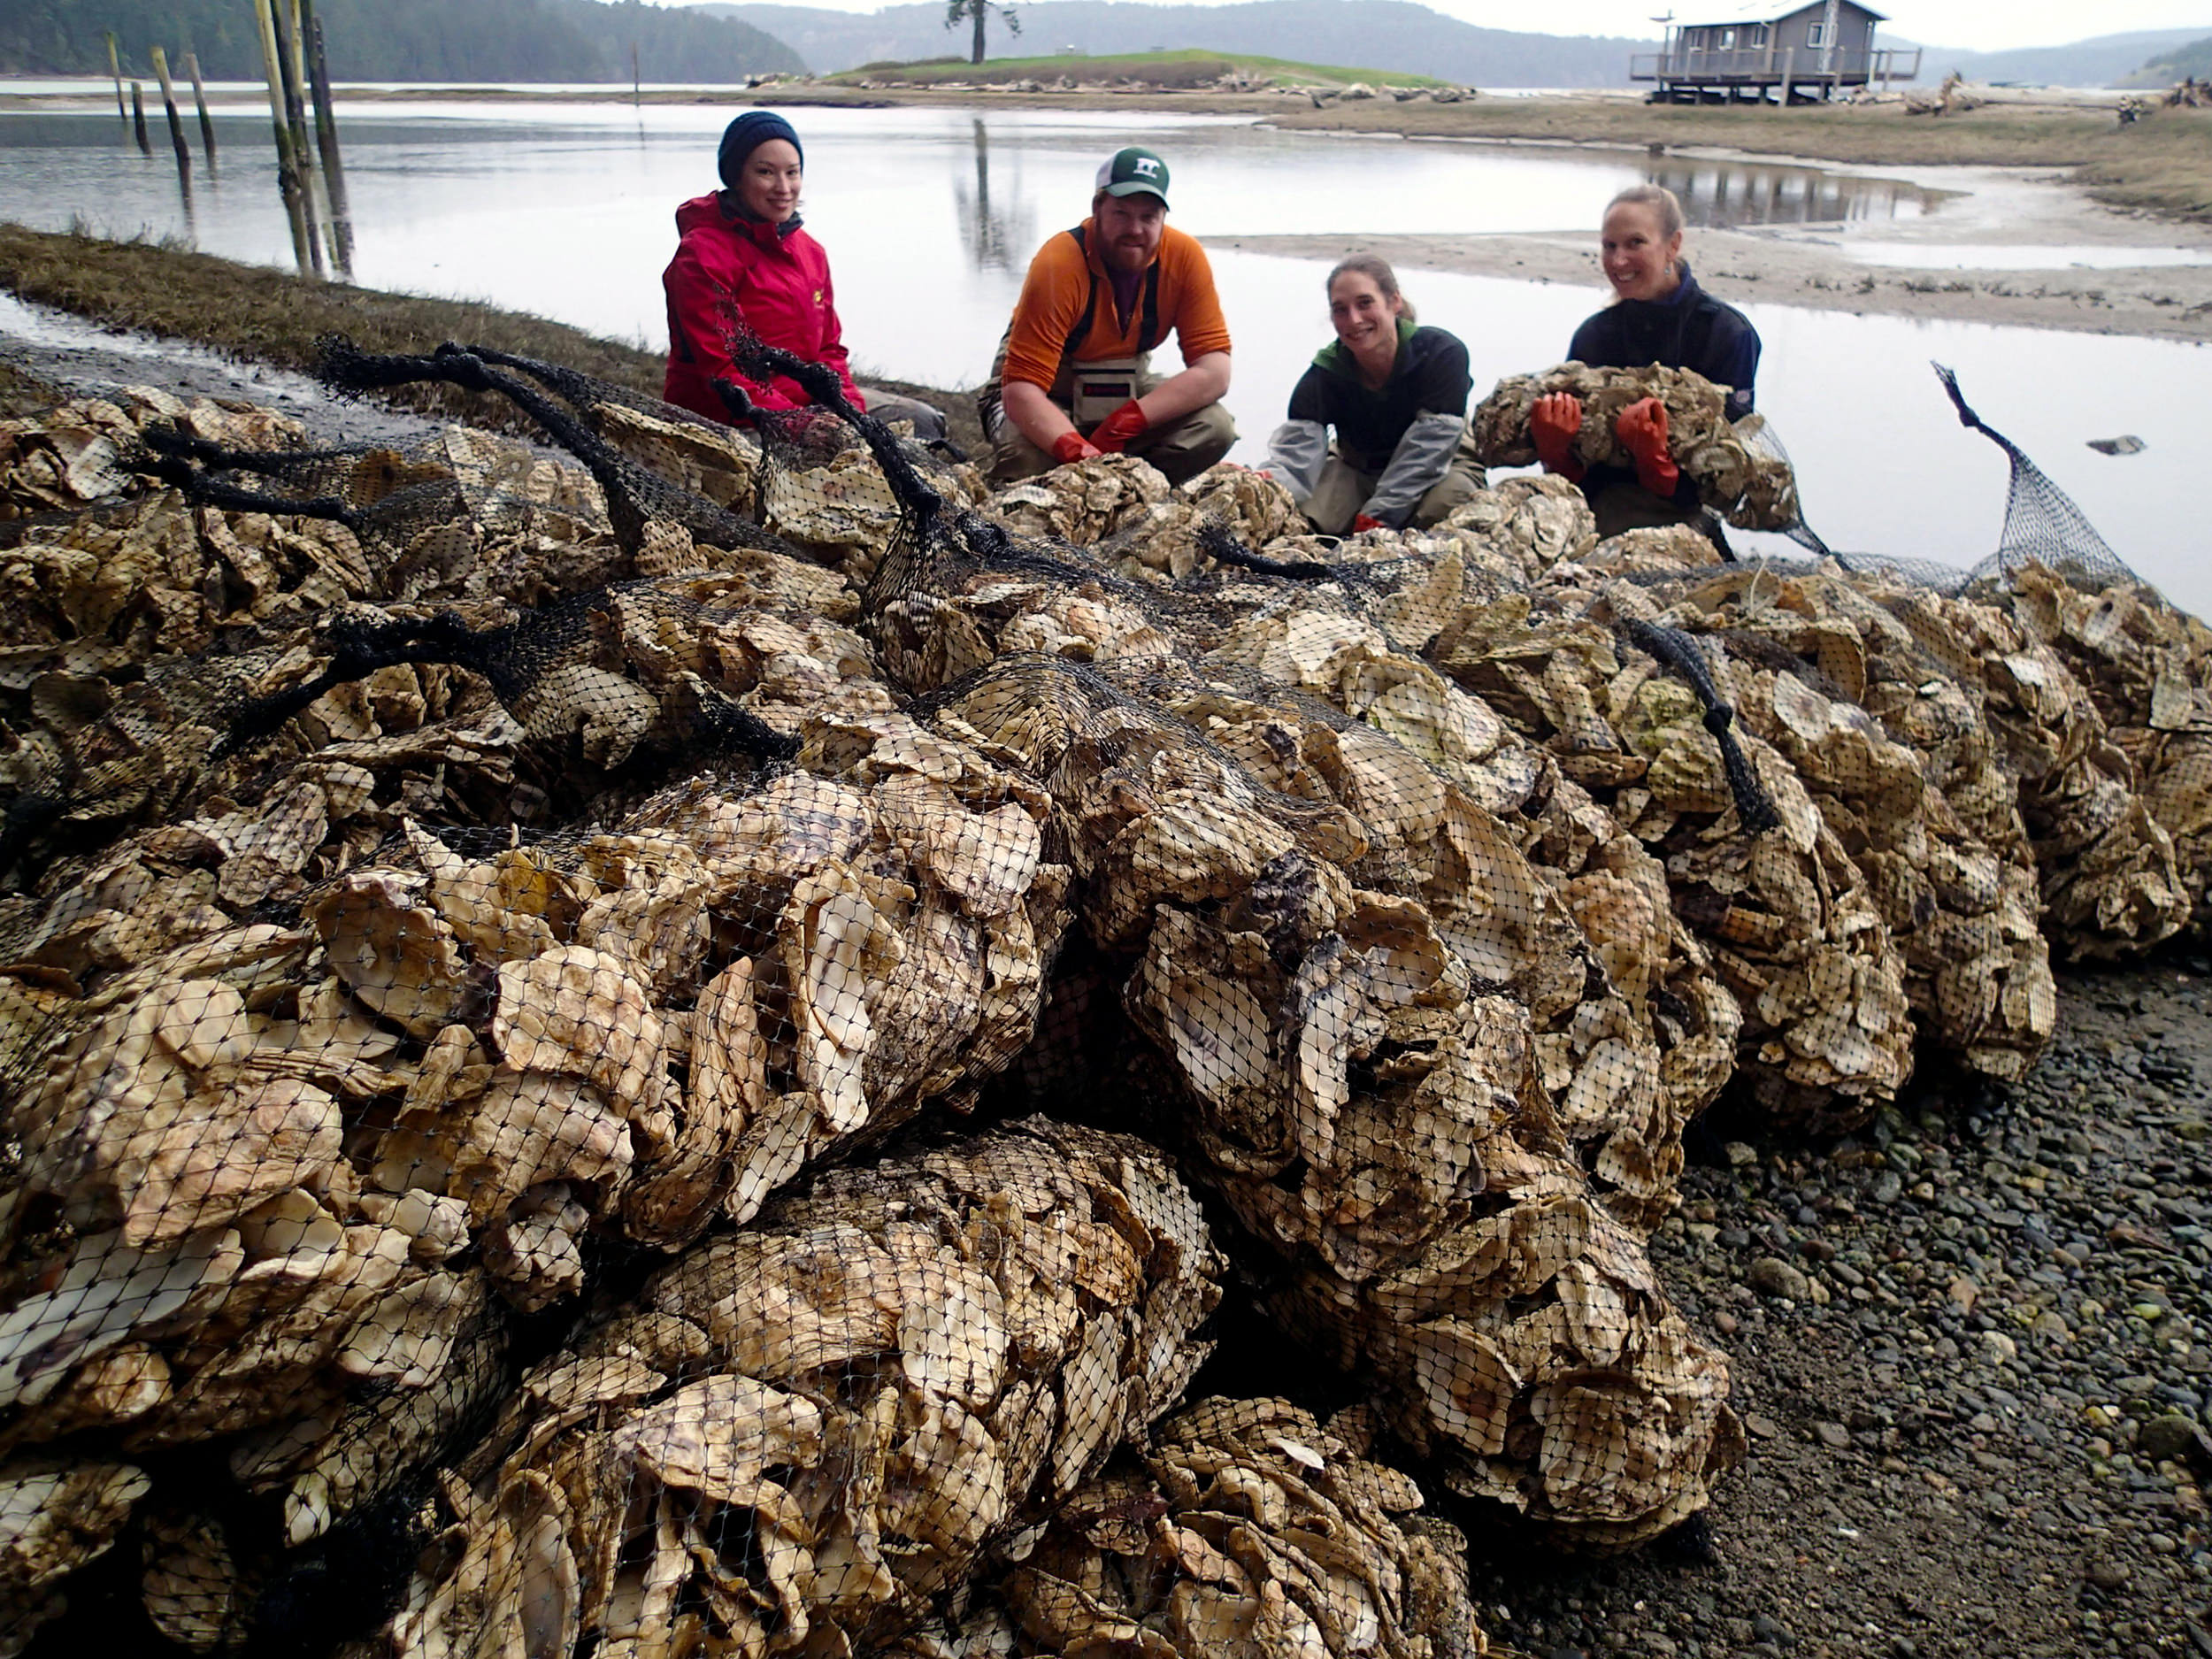  Swinomish Fisheries staff pose next to bags of Pacific oyster shell “seeded” with young Olympia oysters. The Olympia oysters were left in the bags in the intertidal zone for a year in order to protect the young oysters from predators. Staff came bac